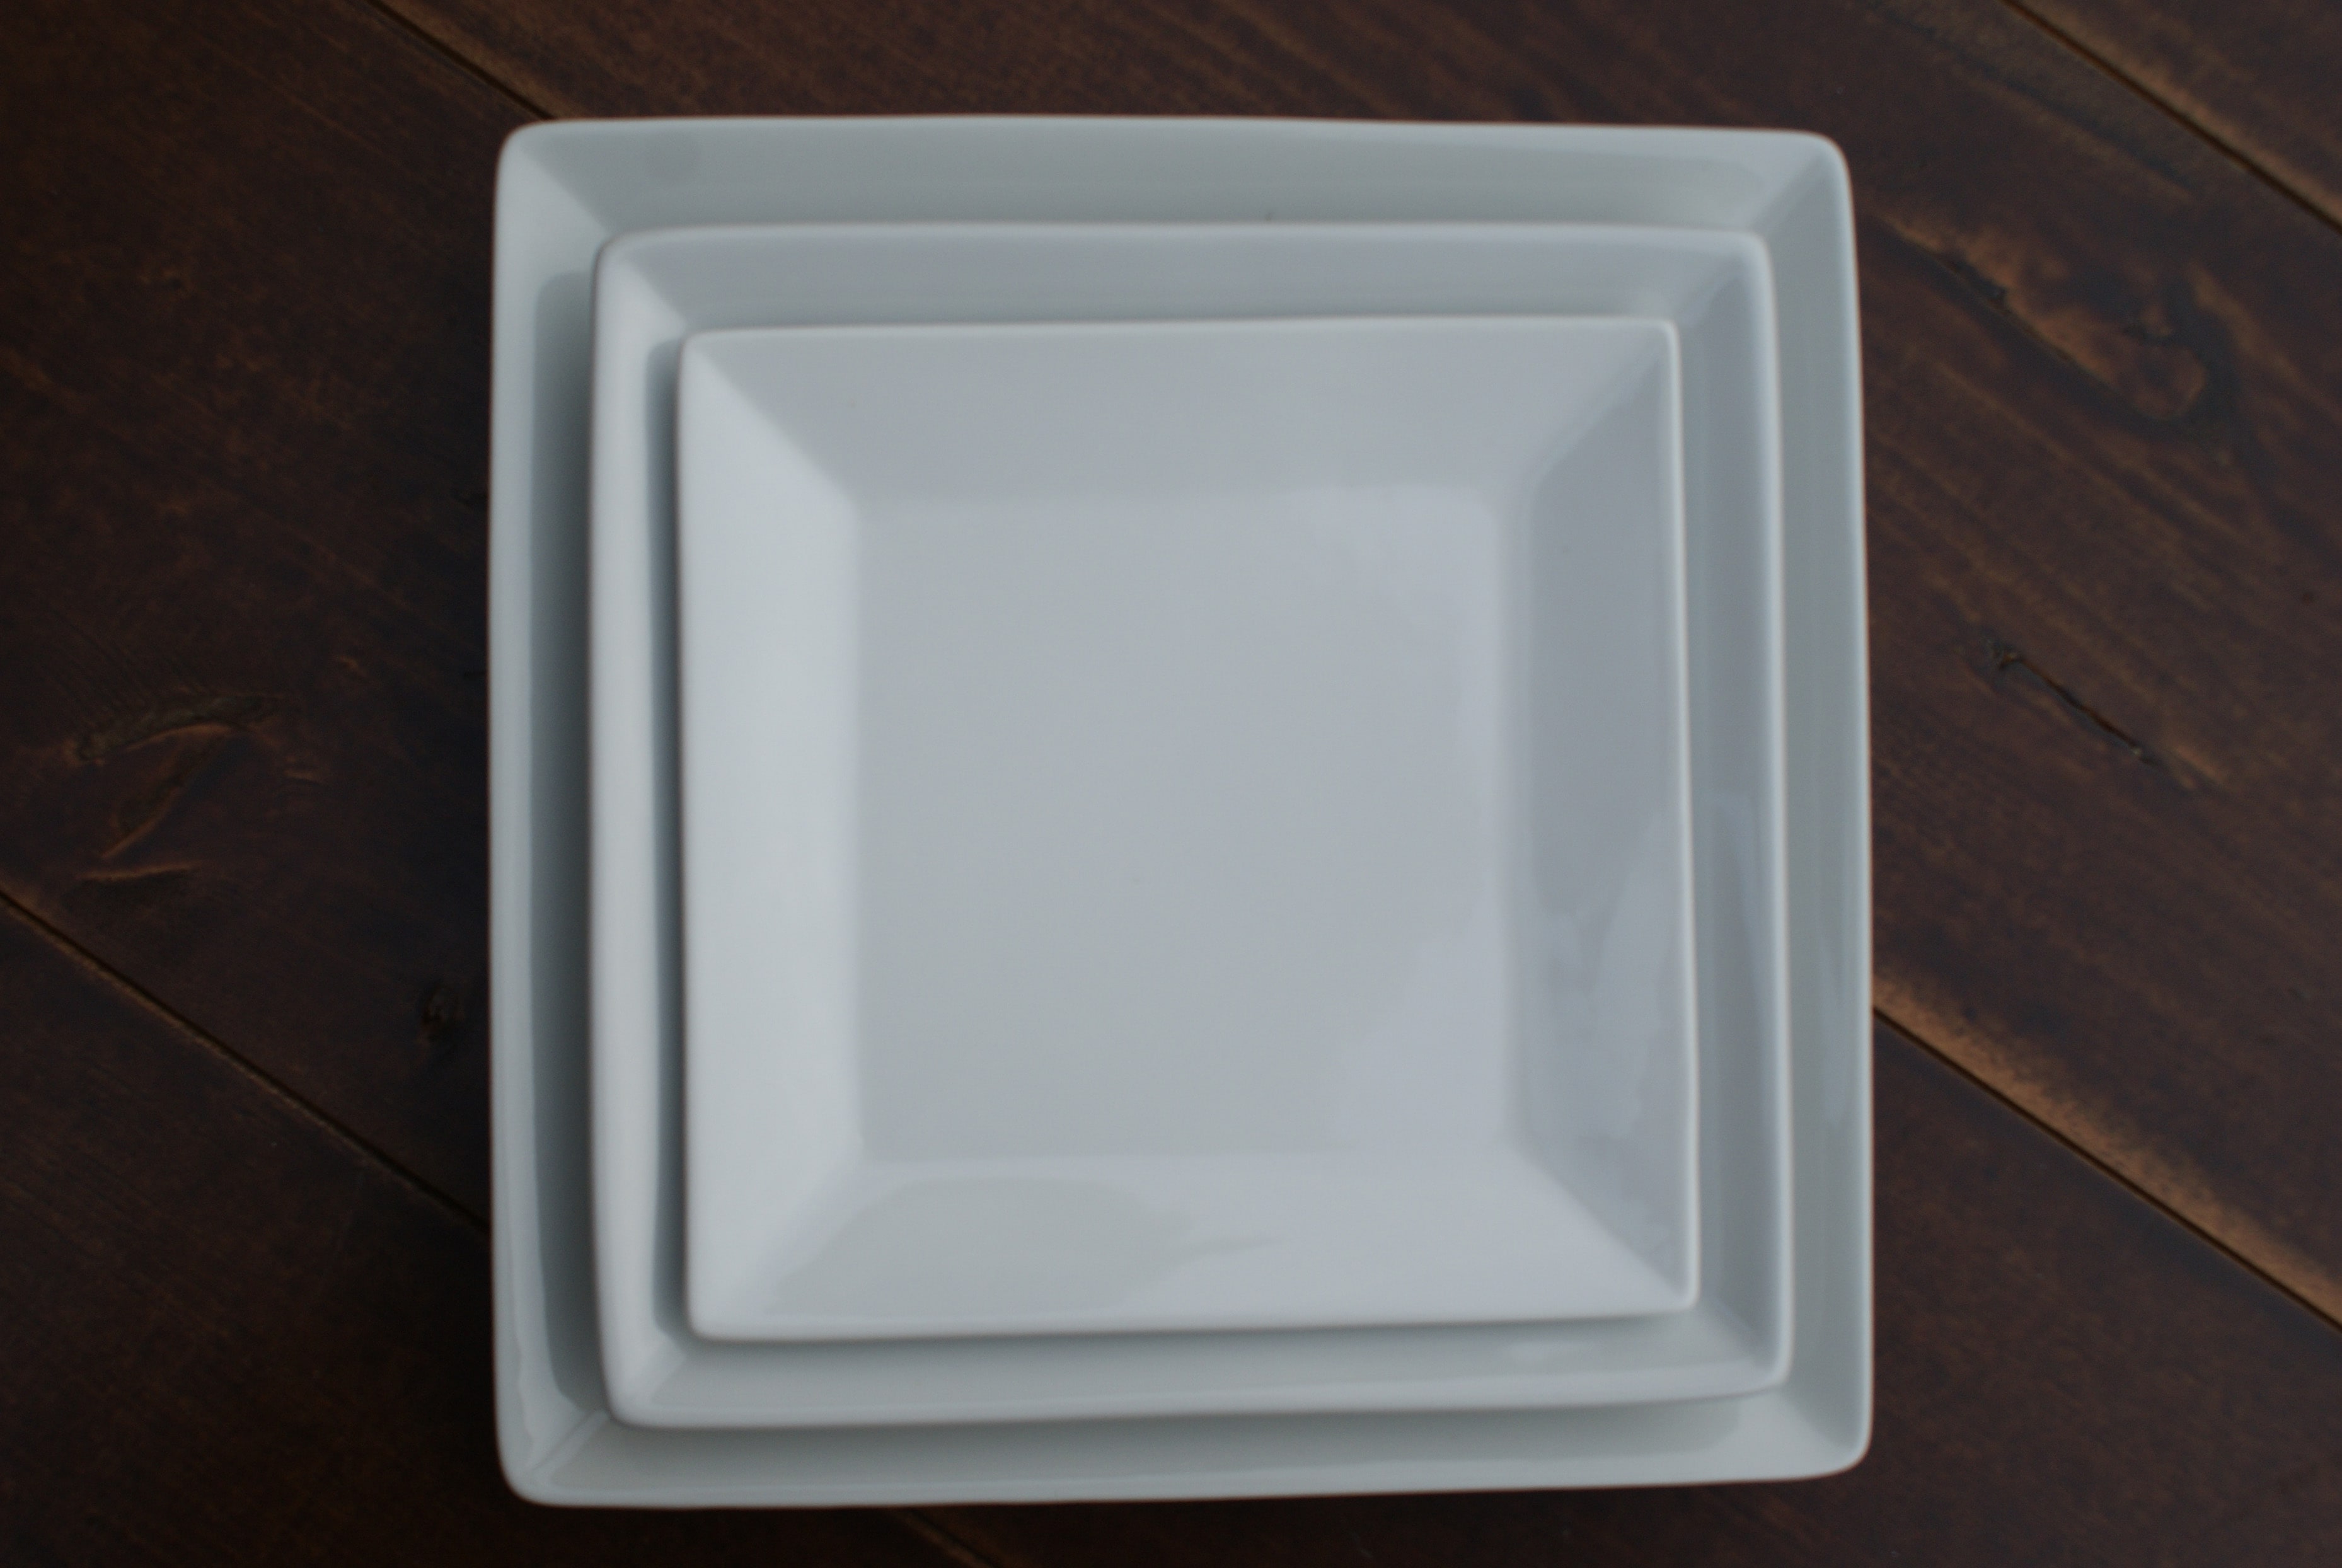 white square china plates stacked on a wood table